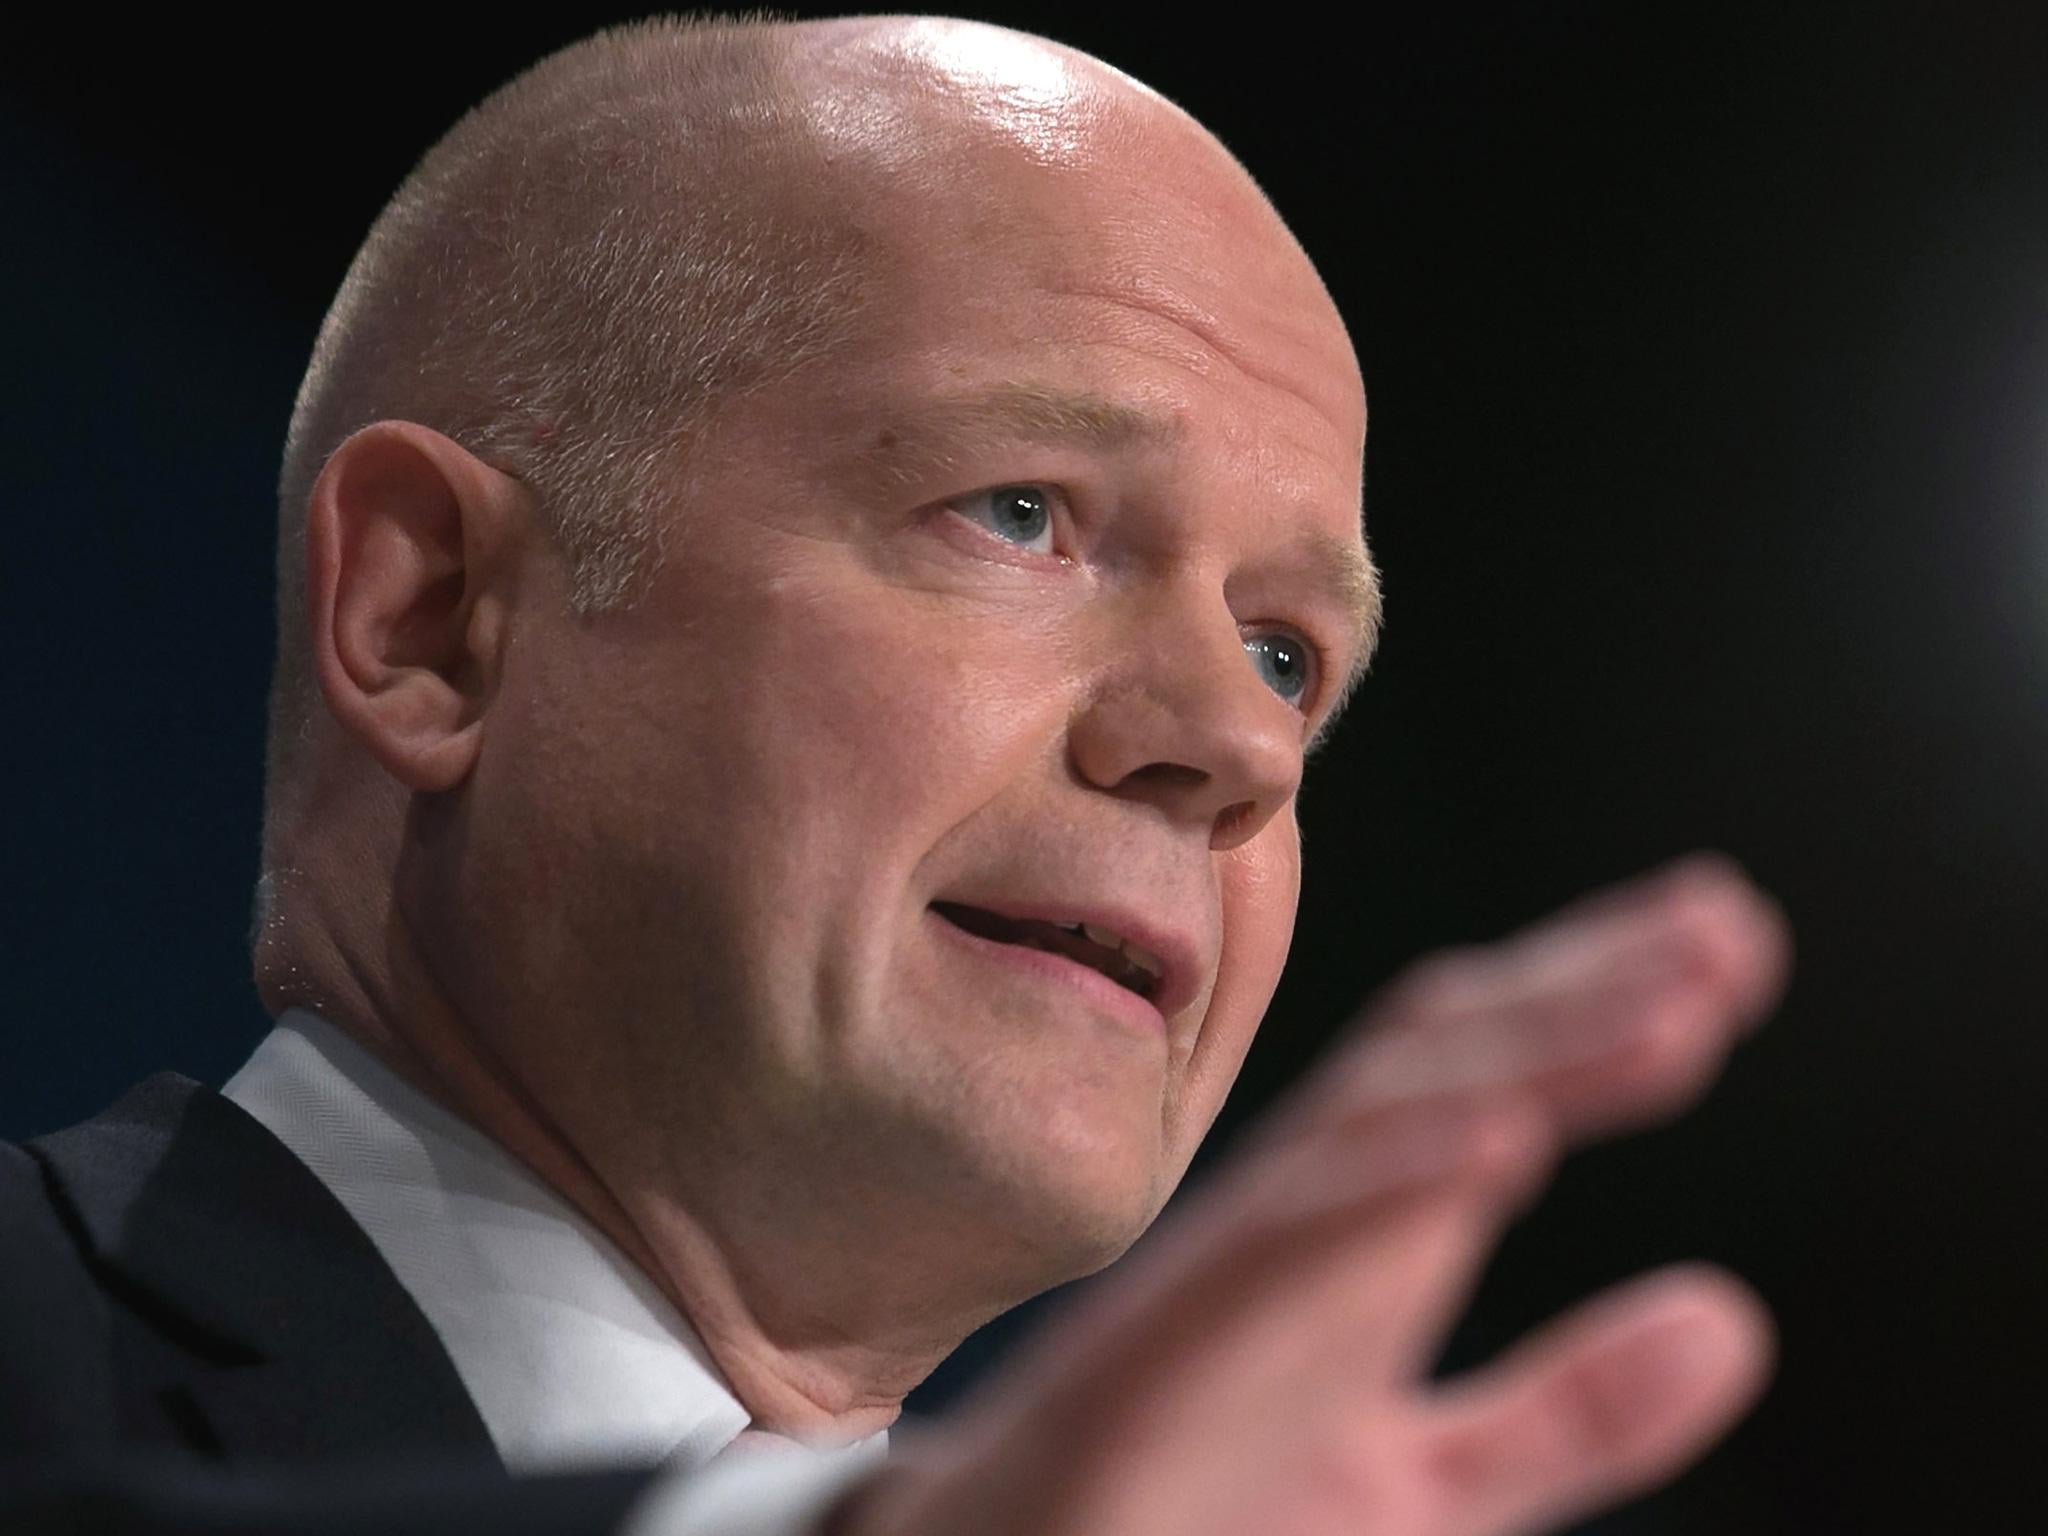 Lord Hague said ministers should be encouraged to argue with the PM